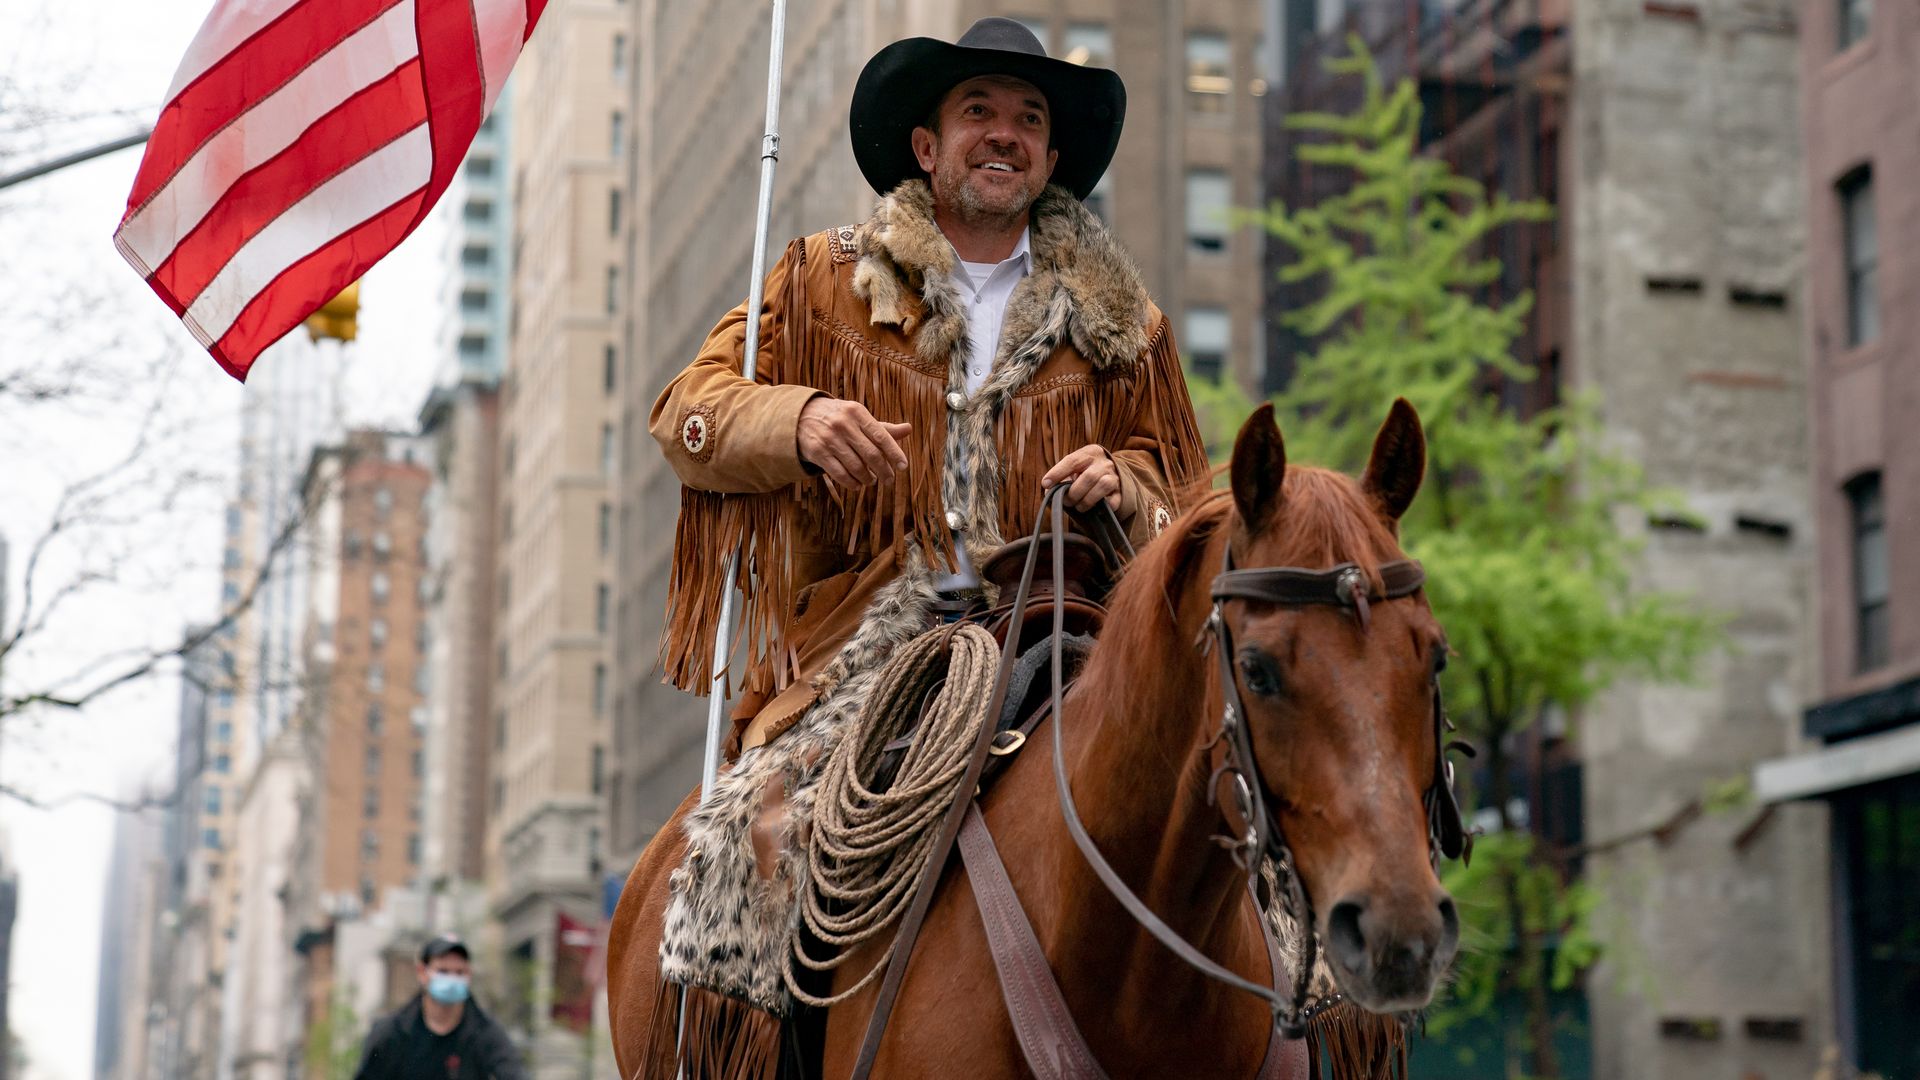 Otero County Commission Chairman and Cowboys for Trump co-founder Couy Griffin rides his horse on 5th avenue on May 1, 2020 in New York City.